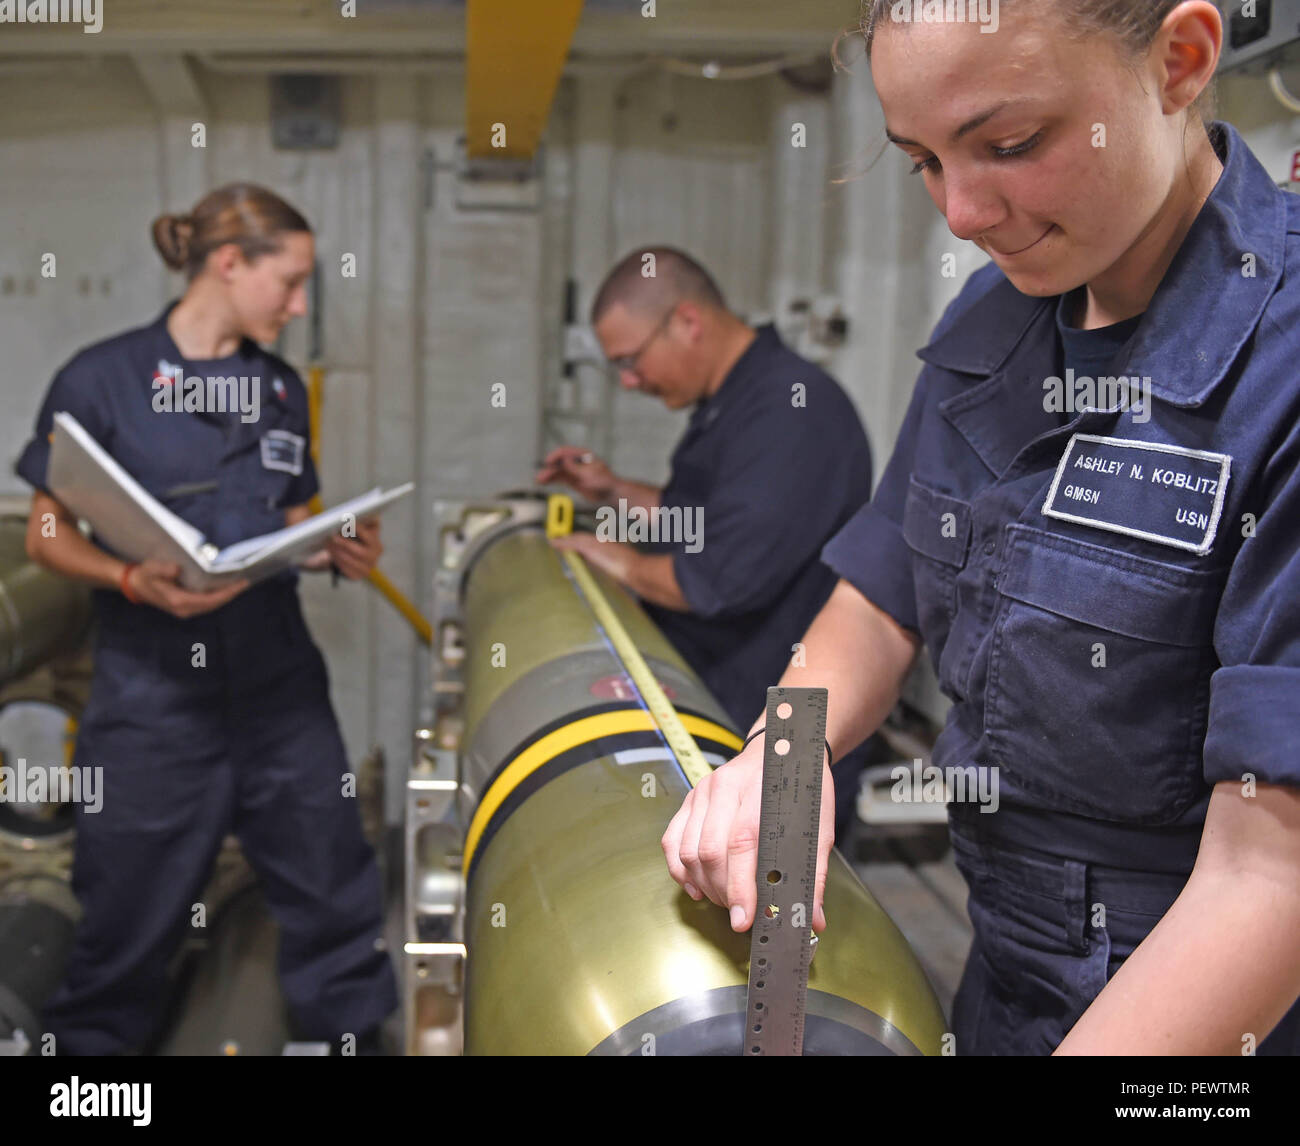 160209-N-KM939-306 PACIFIC OCEAN (Feb 9, 2016) - Gunner’s Mate Seaman Ashley Koblitz, from Memphis, Texas, measures an MK-54 torpedo in preparation for banding in the weapons locker aboard the guided-missile destroyer, USS Stockdale (DDG 106). Providing a combat-ready force to protect collective maritime interests, Stockdale, assigned to the Stennis strike group, is operating as part of the Great Green Fleet on a regularly scheduled Western Pacific deployment. (U.S. Navy photo by Mass Communication Specialist 3rd Class David A. Cox/Released) Stock Photo